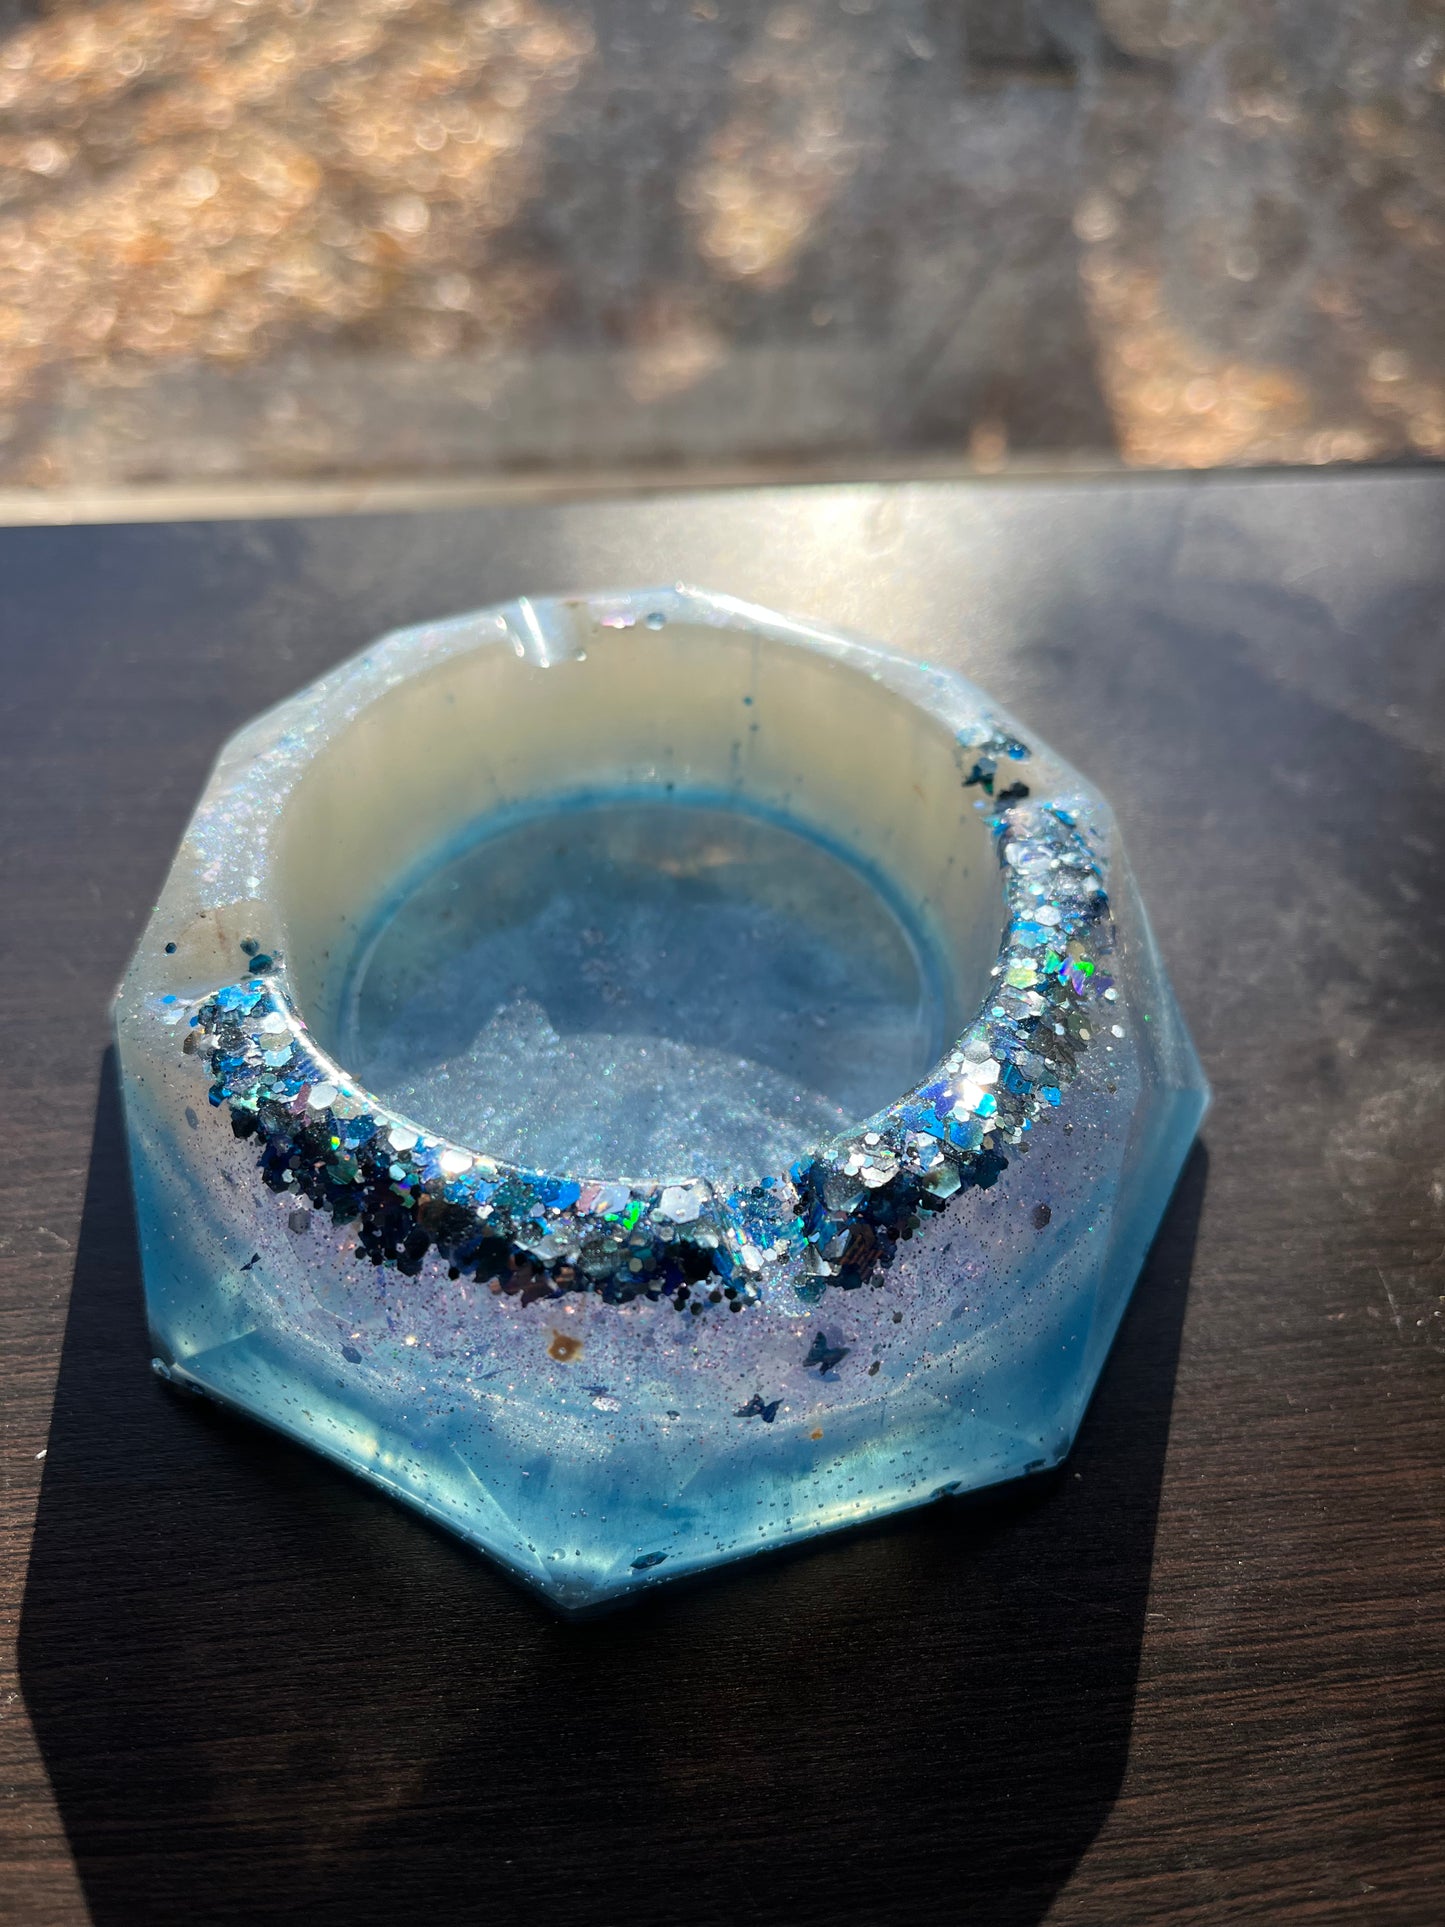 Resin Blue White Silver Trinket Jewelry Crystals Arts Crafts Money Change Office Supplies Portable Multi Use Ashtray